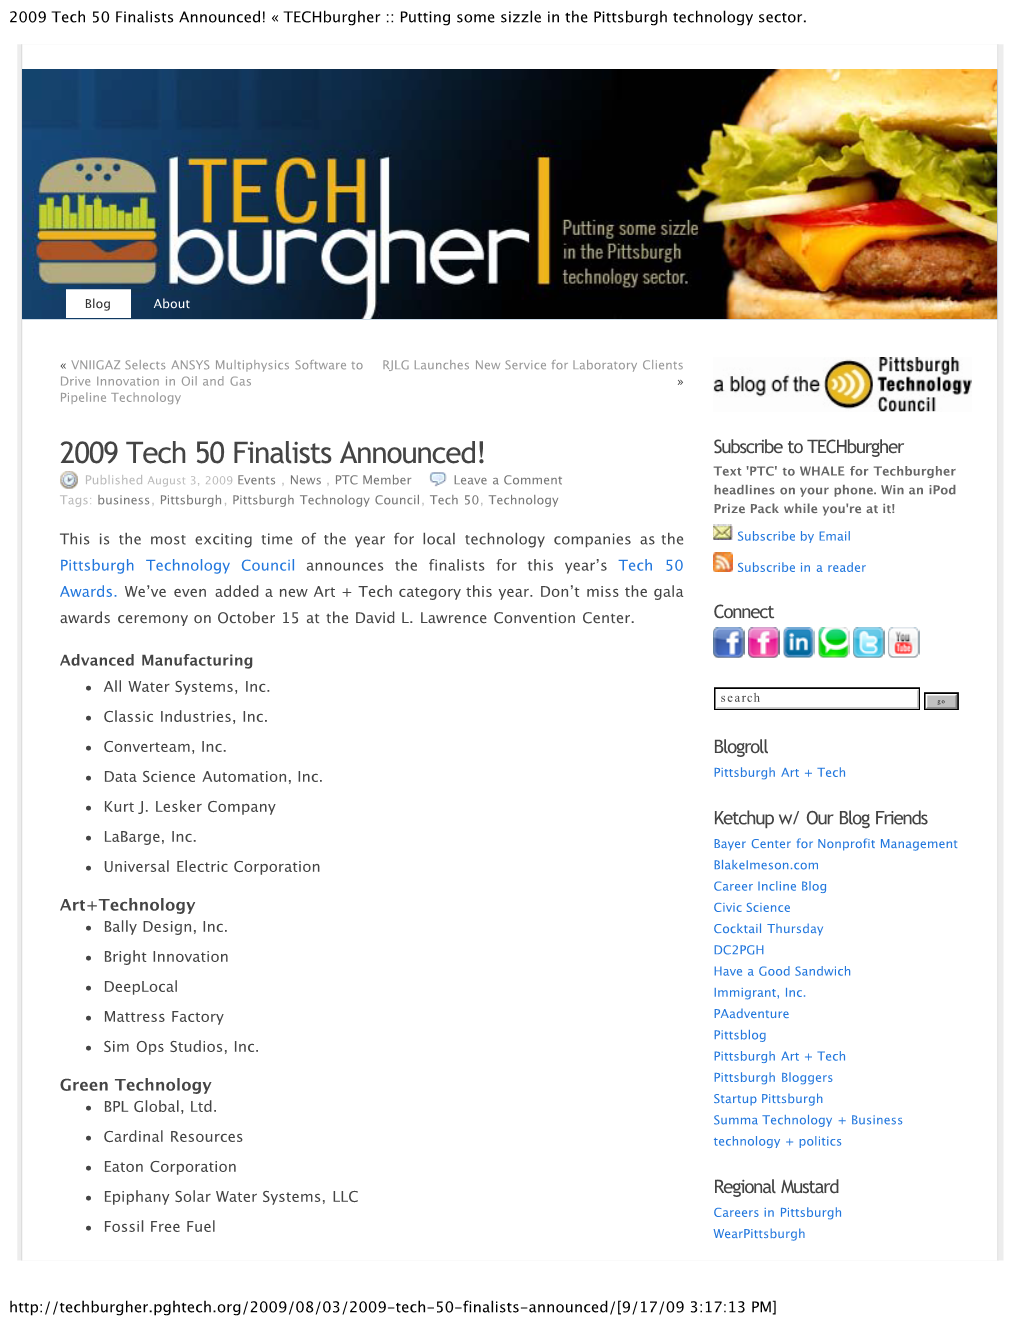 2009 Tech 50 Finalists Announced! « Techburgher :: Putting Some Sizzle in the Pittsburgh Technology Sector